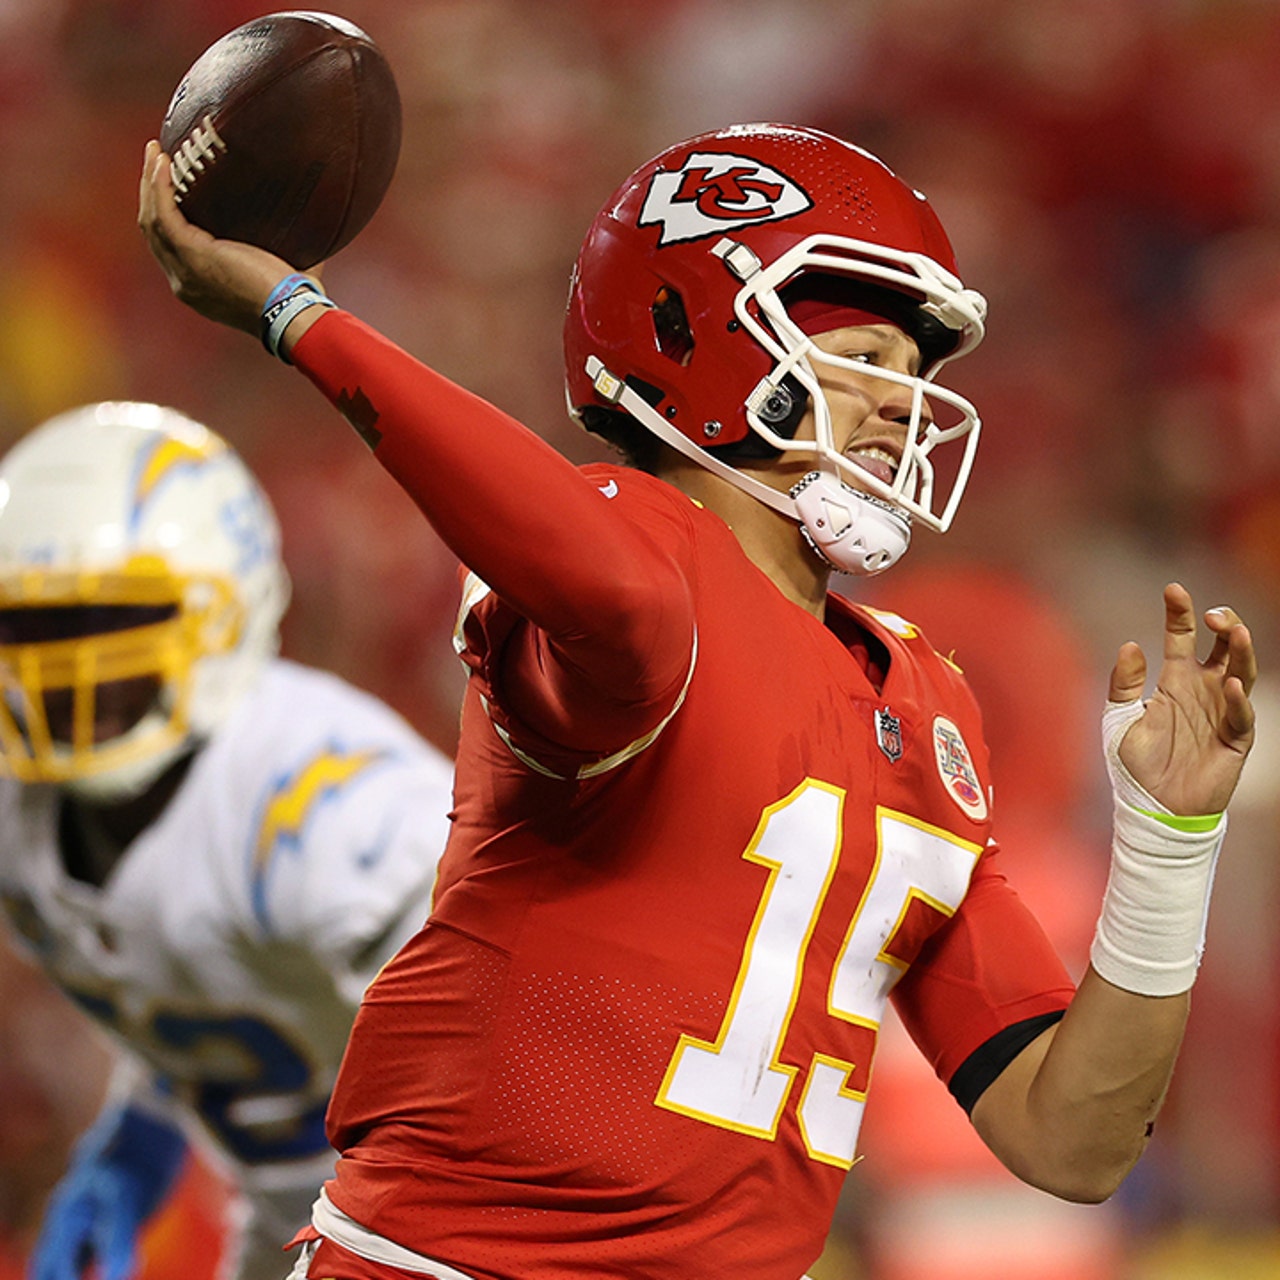 Is Patrick Mahomes showing that he does not miss Tyreek Hill?, THE HERD